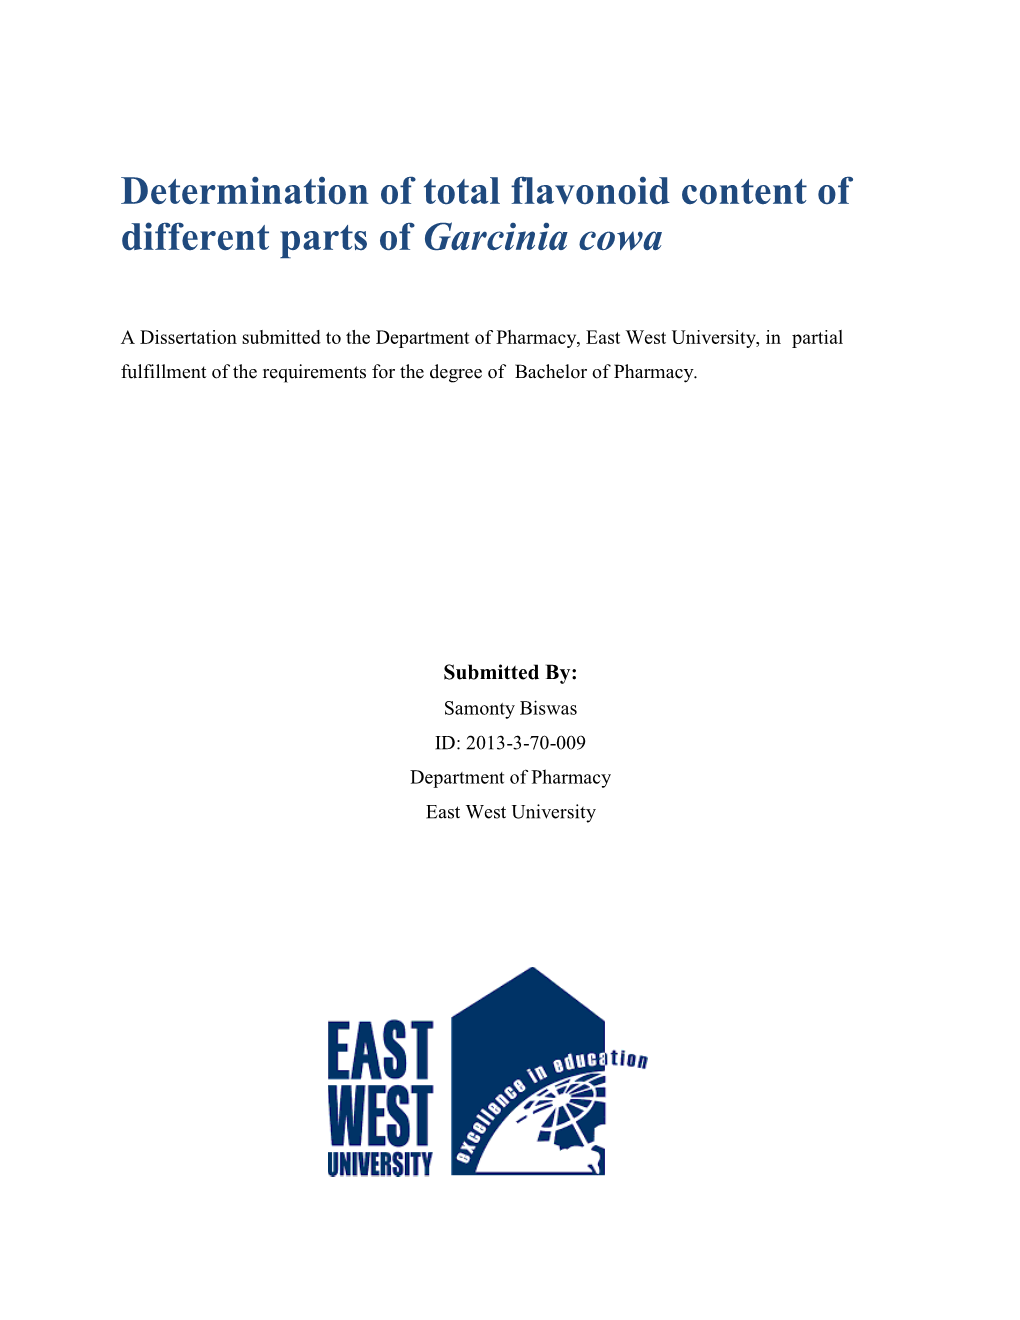 Determination of Total Flavonoid Content of Different Parts of Garcinia Cowa